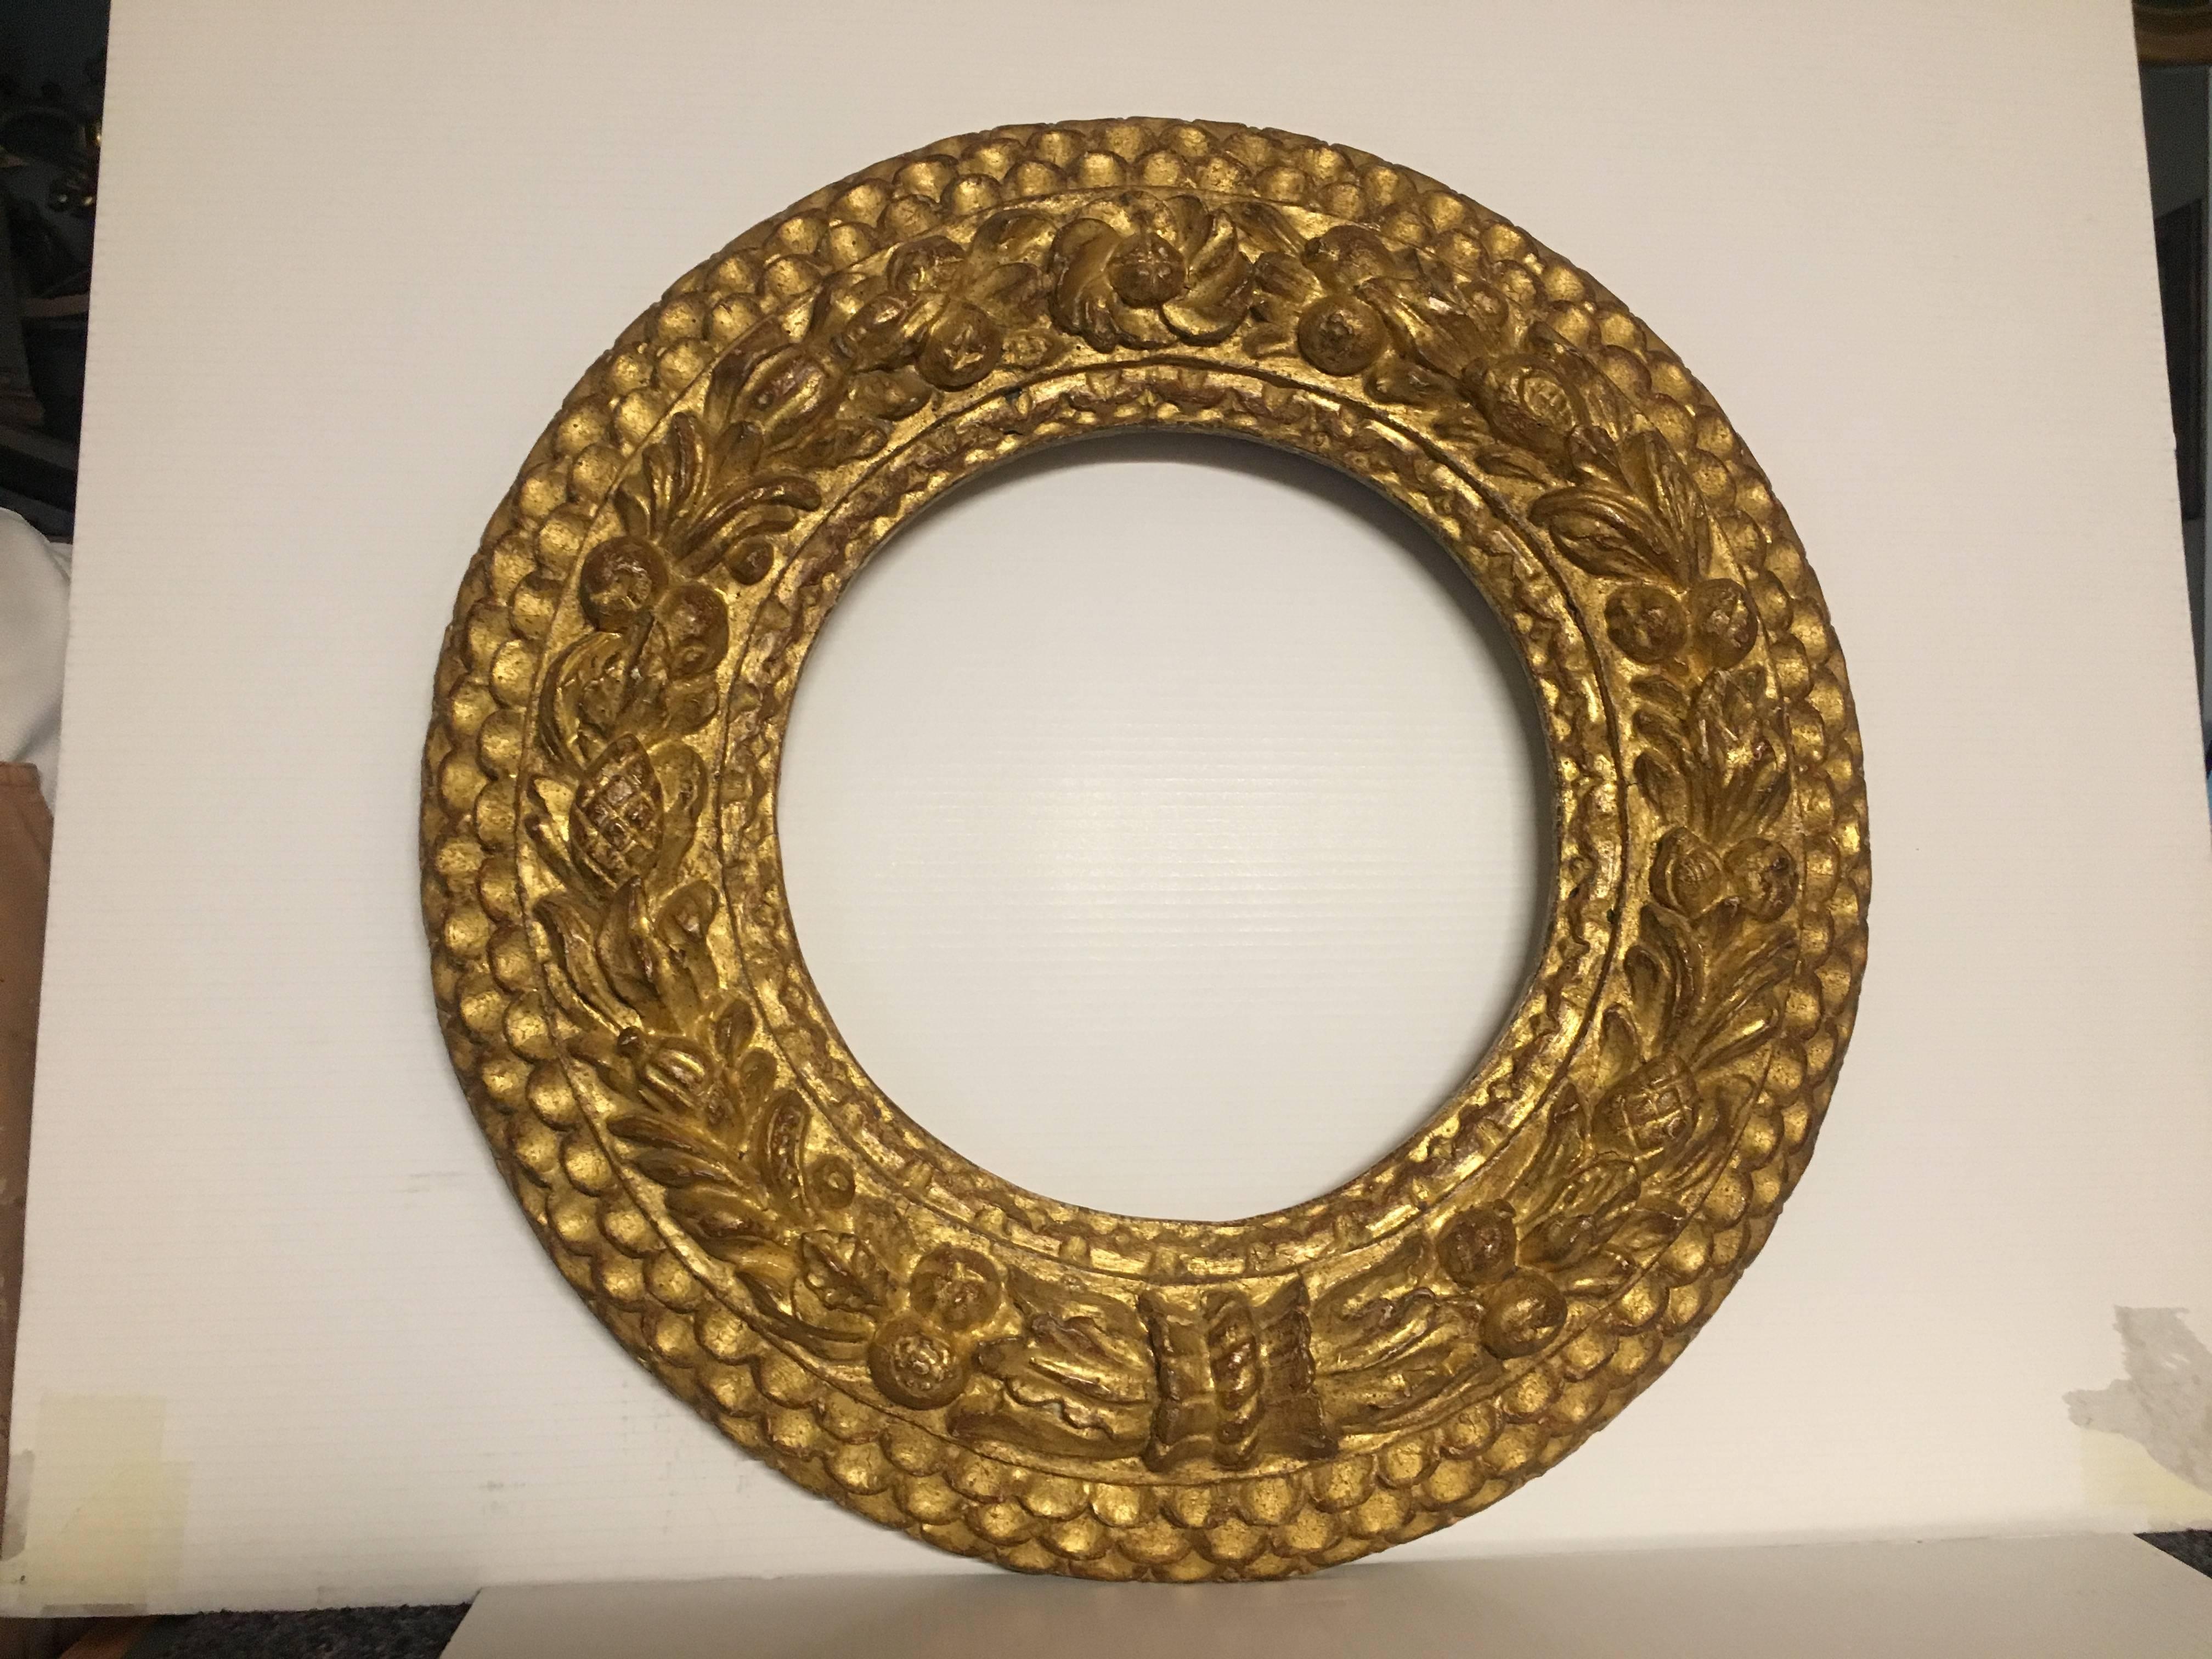 Italian contemporary hand-carved round wood frame with gold leaf cover. Available in custom sizes. 
Measures: Diameter cm.66 x 9 (Internal diameter cm.35).
 